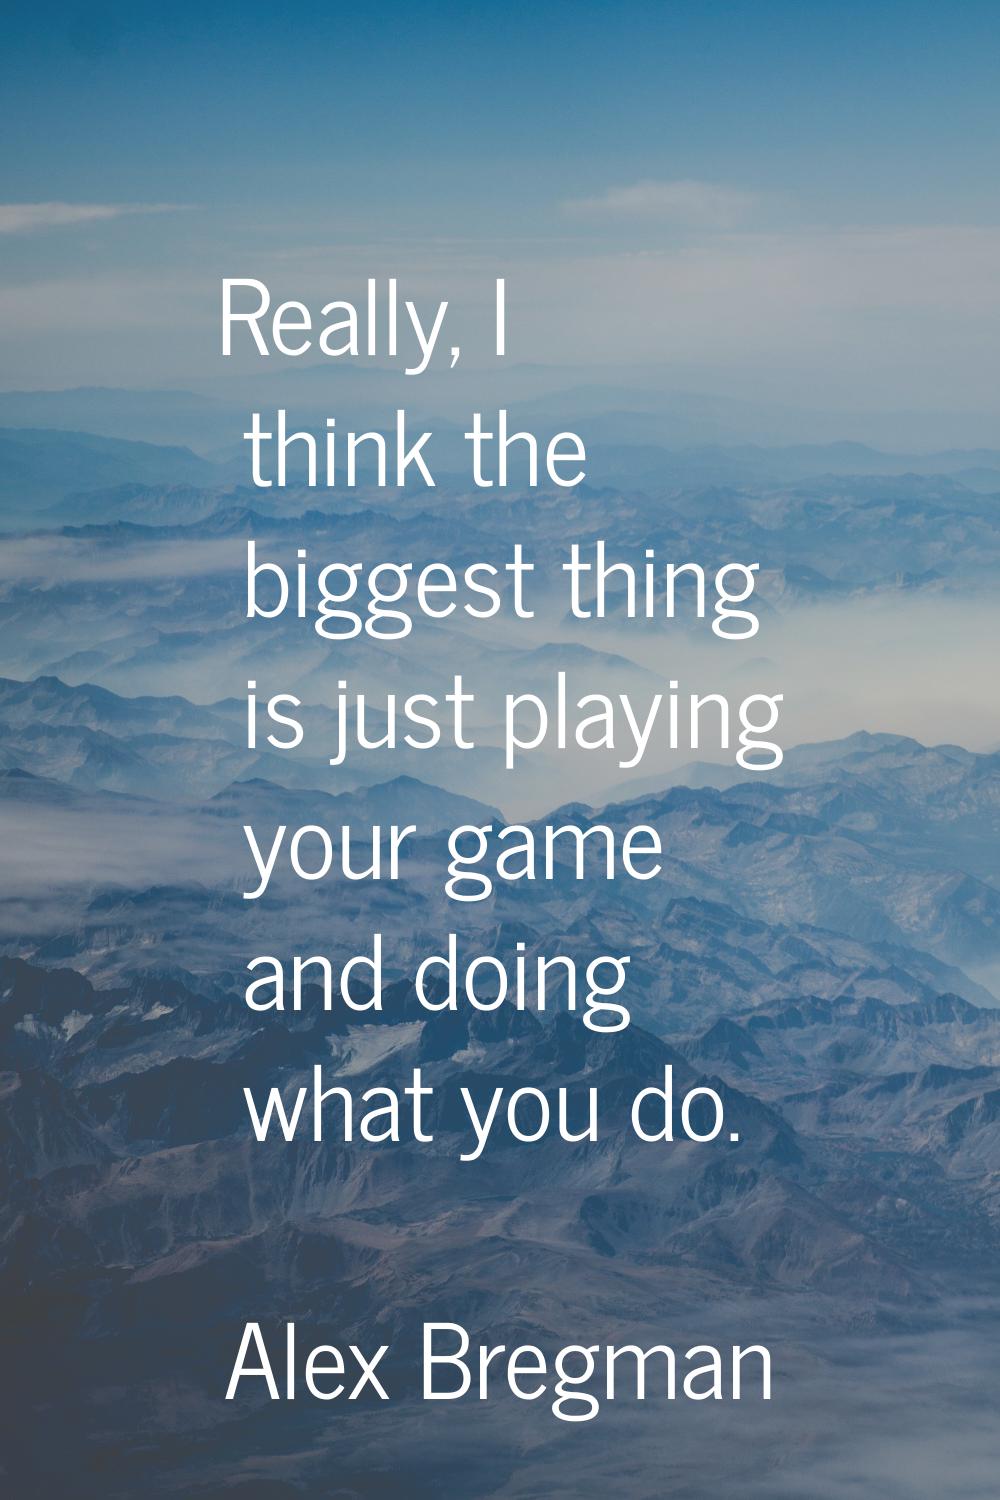 Really, I think the biggest thing is just playing your game and doing what you do.